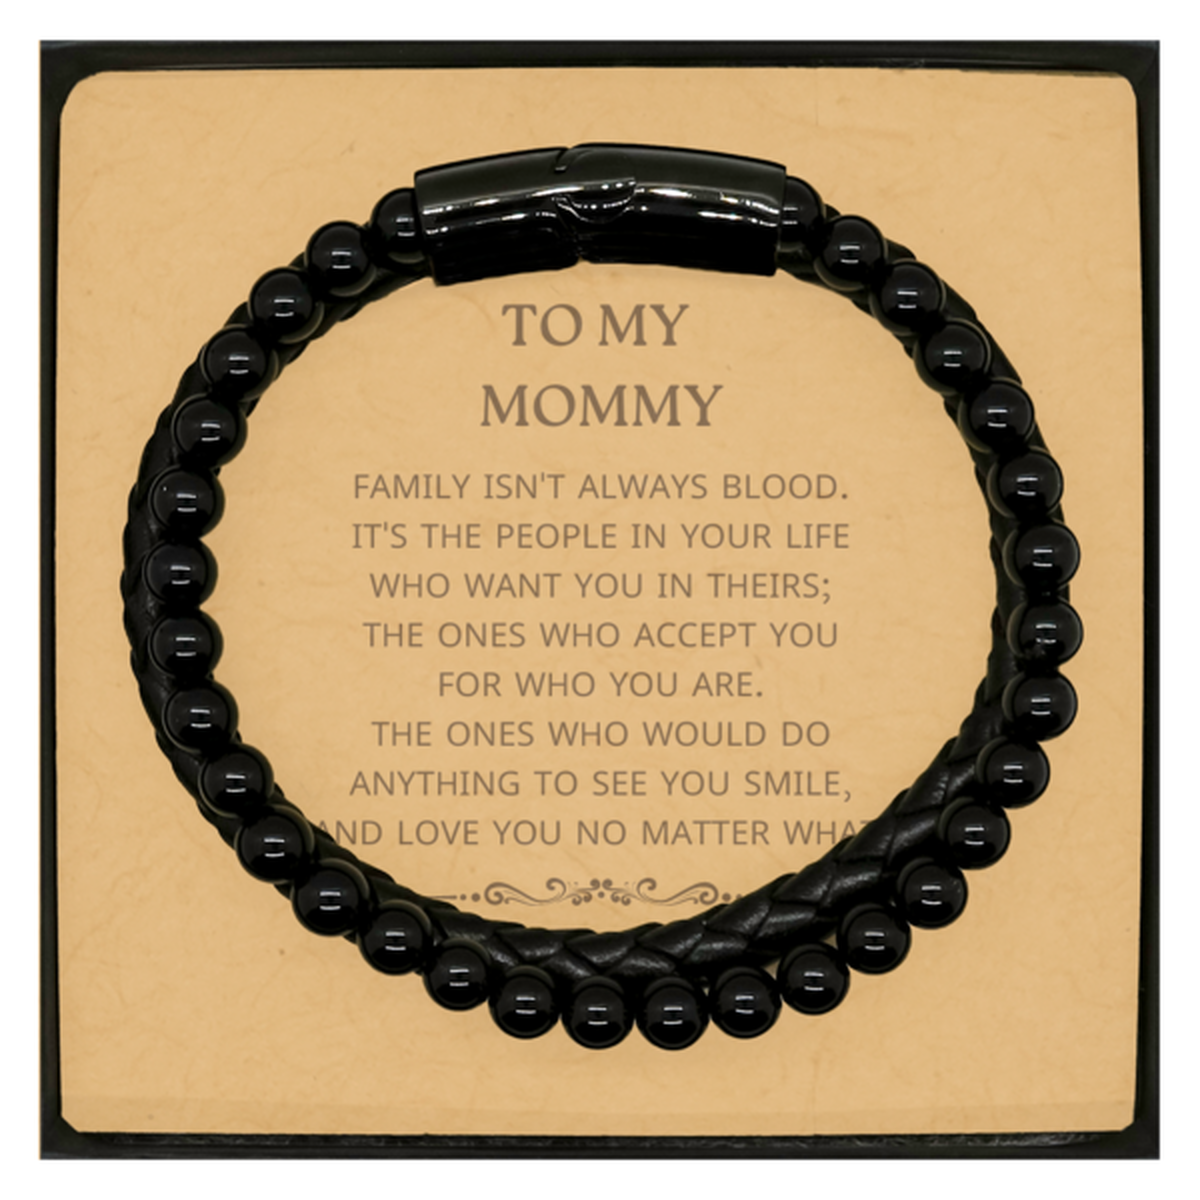 To My Mommy Gifts, Family isn't always blood, Mommy Stone Leather Bracelets, Birthday Christmas Unique Present For Mommy